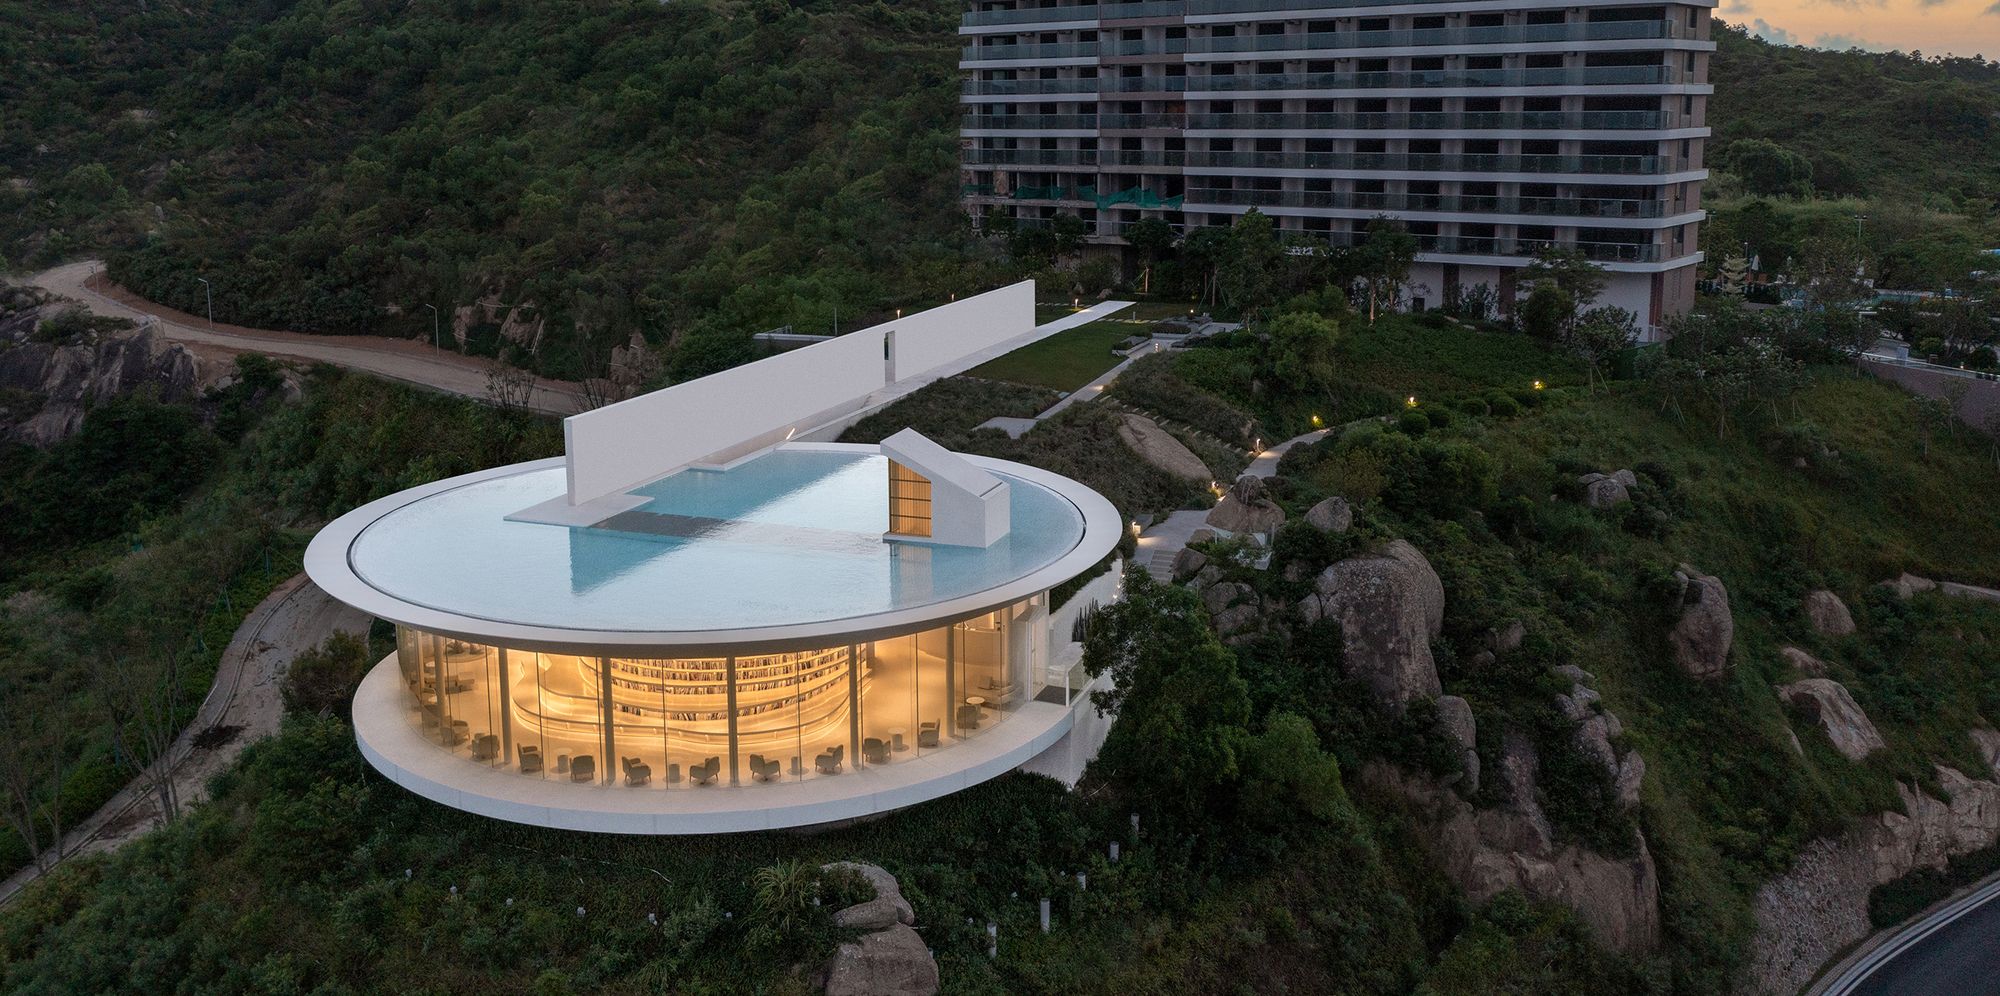 The Water Drop Library